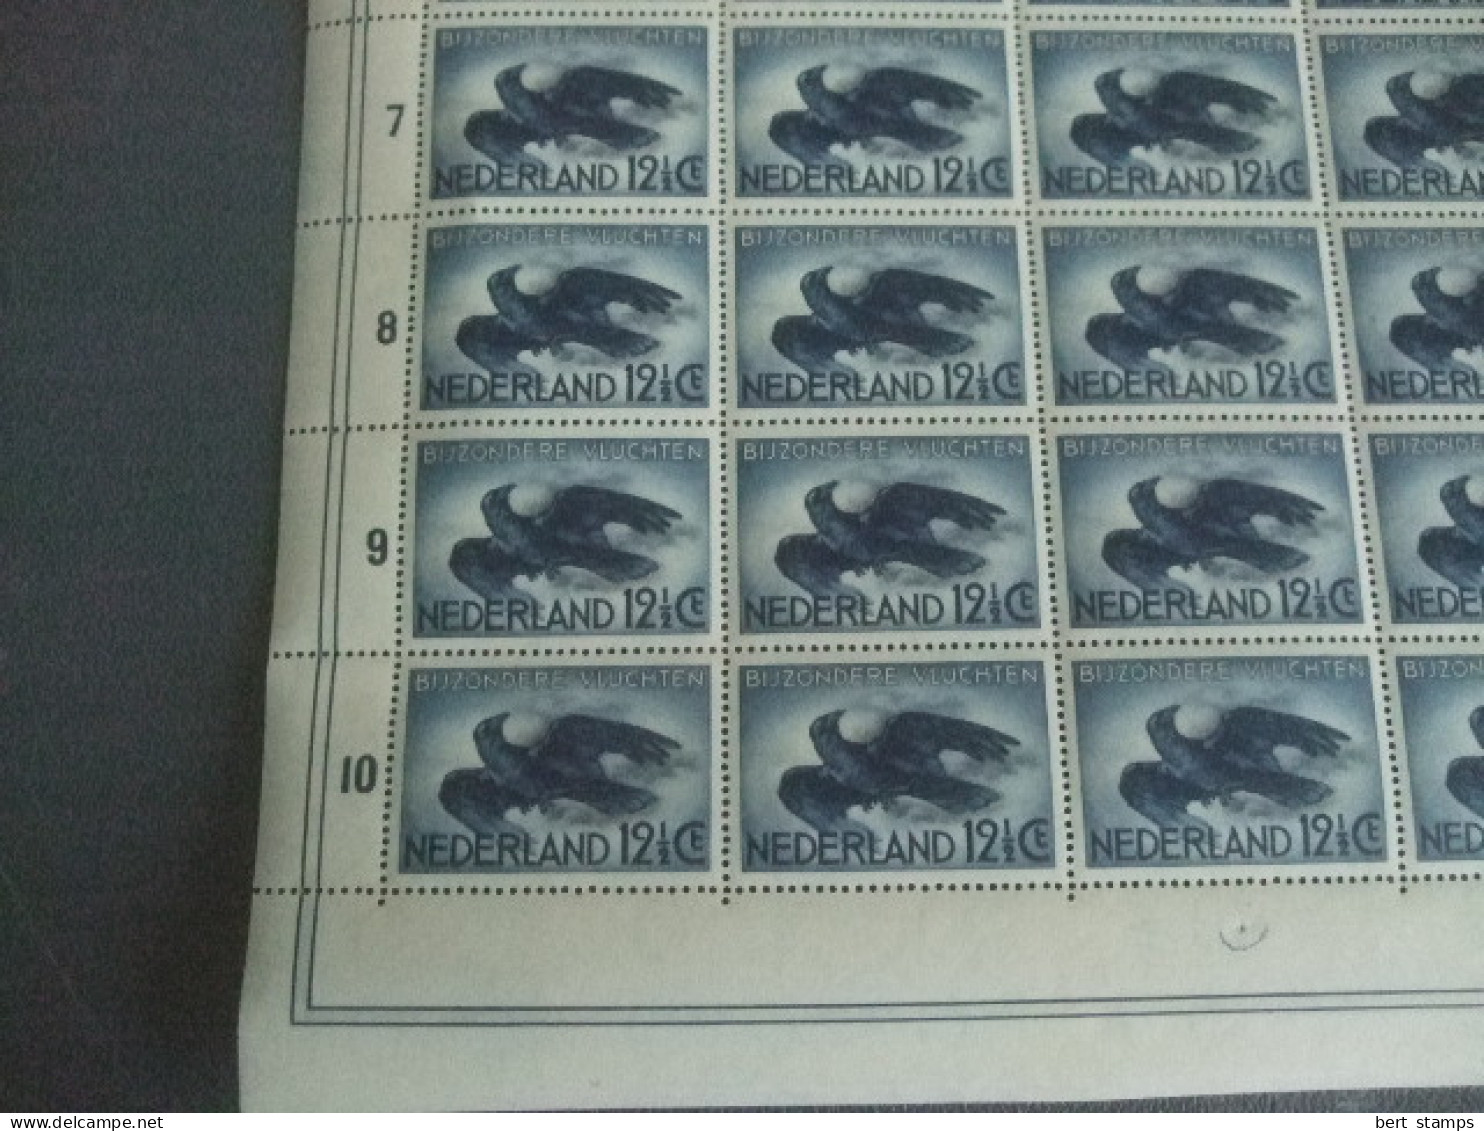 Netherlands Nice compleet sheet Airmail LP 11, MNH  thematic Birds flying Crow. also plate errors!!!